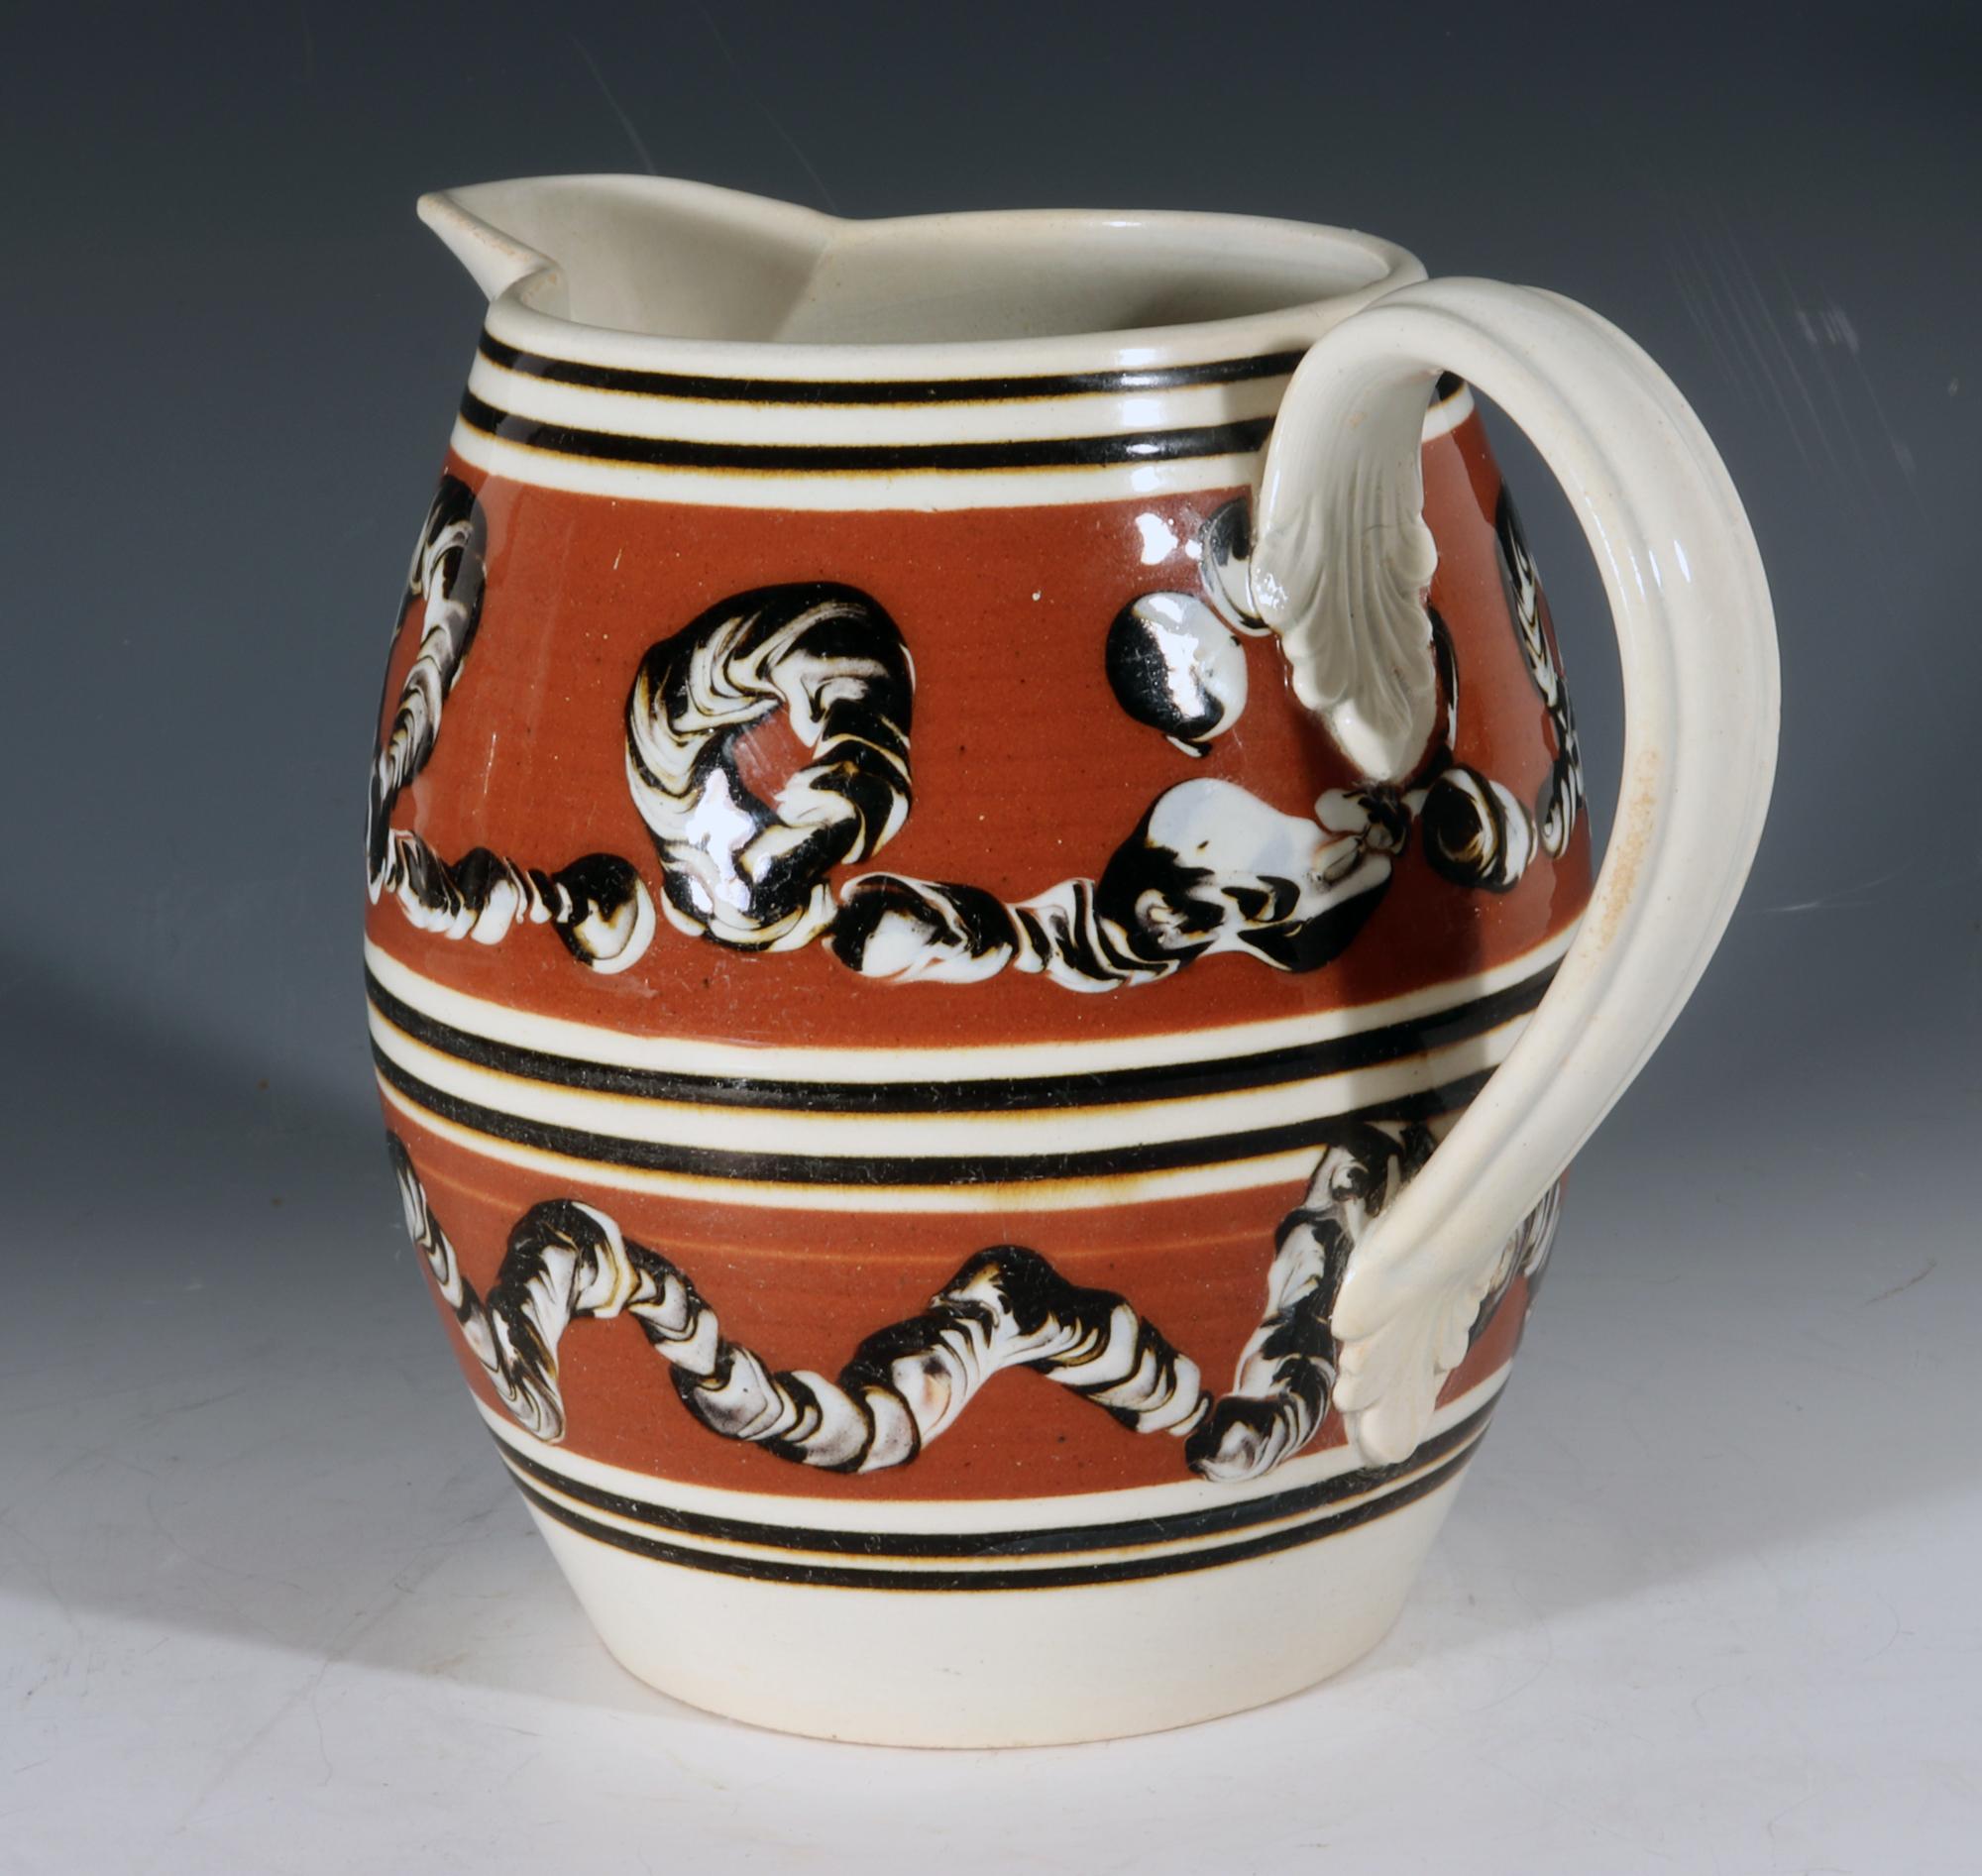 19th Century Mocha Pottery Jug with Earthworm Designs For Sale